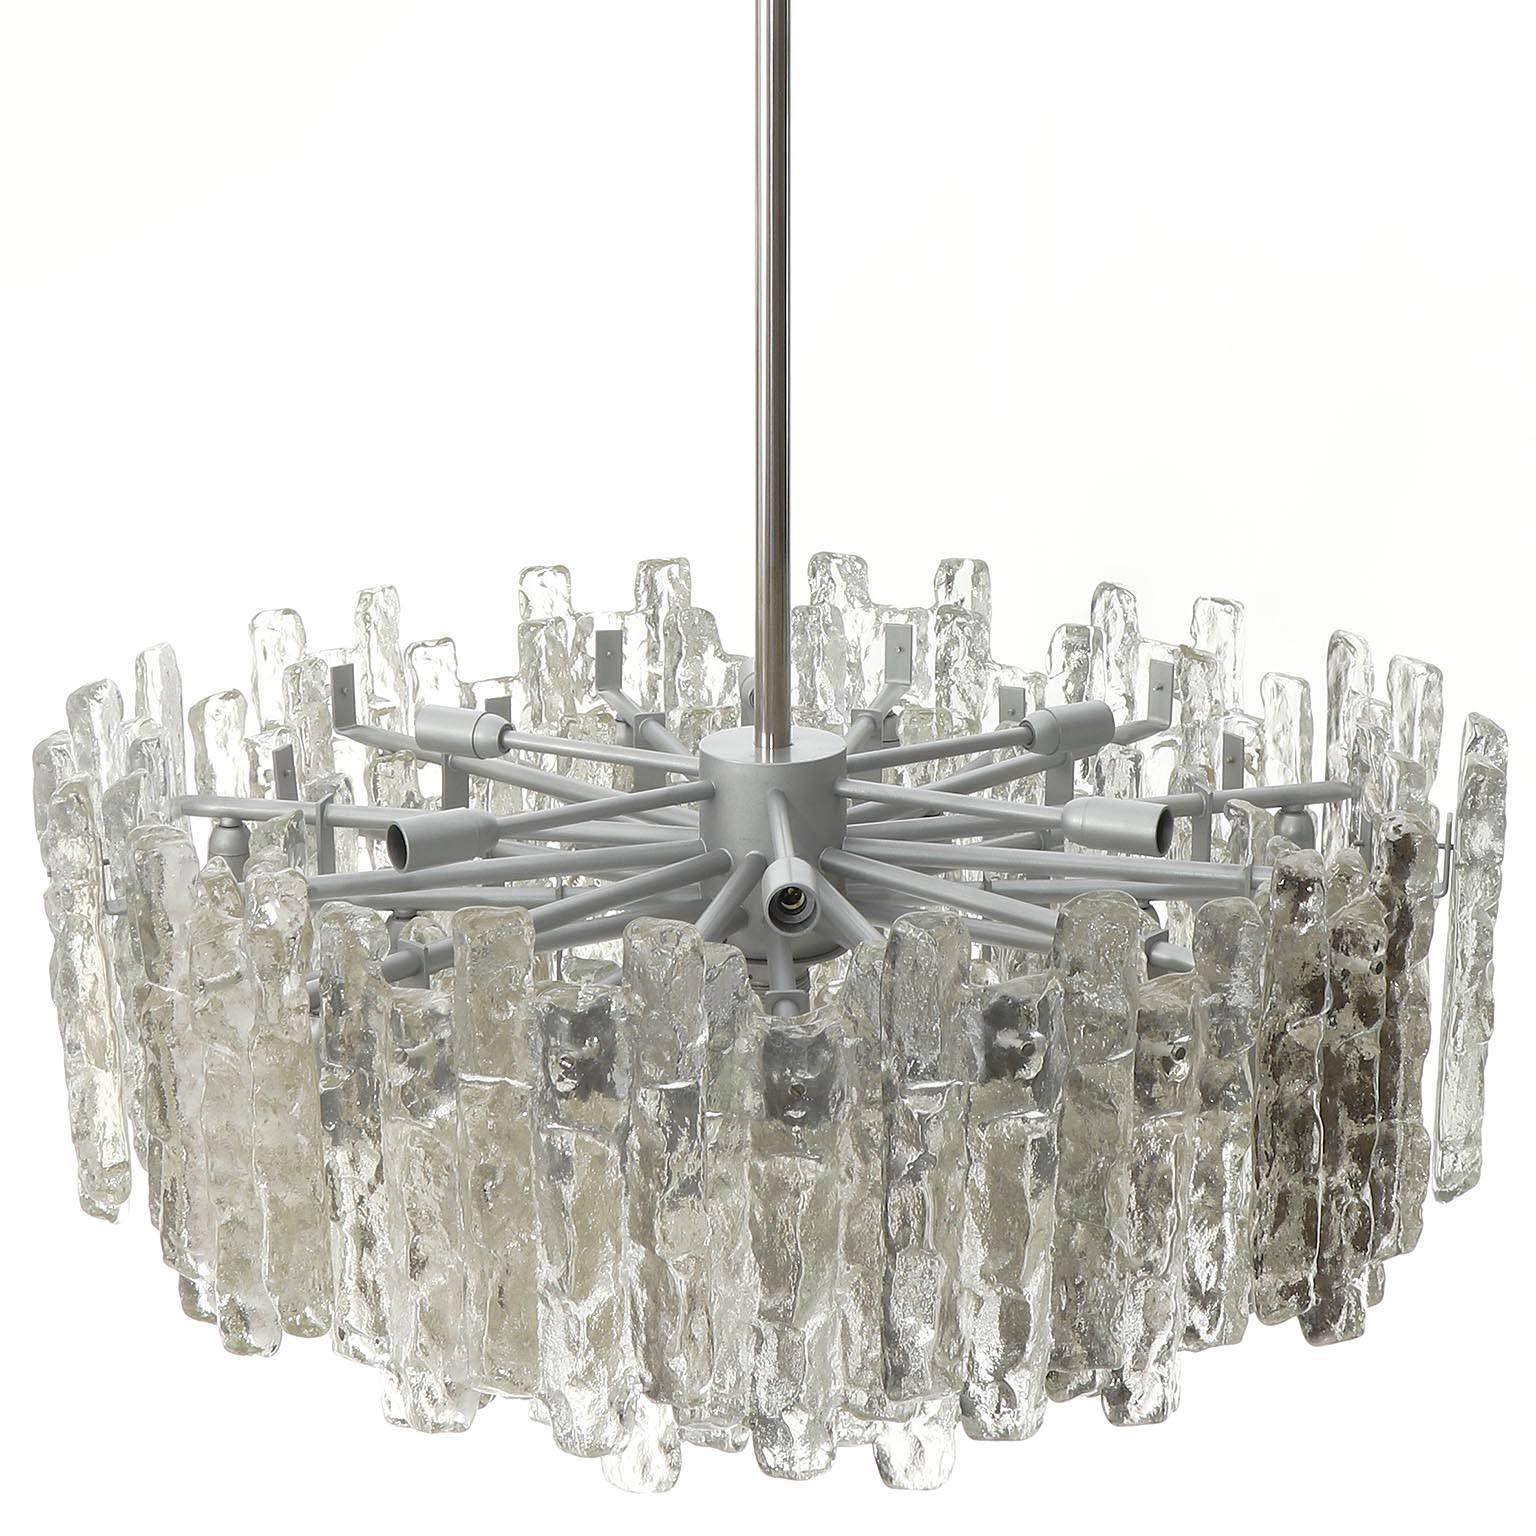 Frosted One of Two Large Kalmar Chandeliers, Ice Glass and Nickel, 1960s For Sale